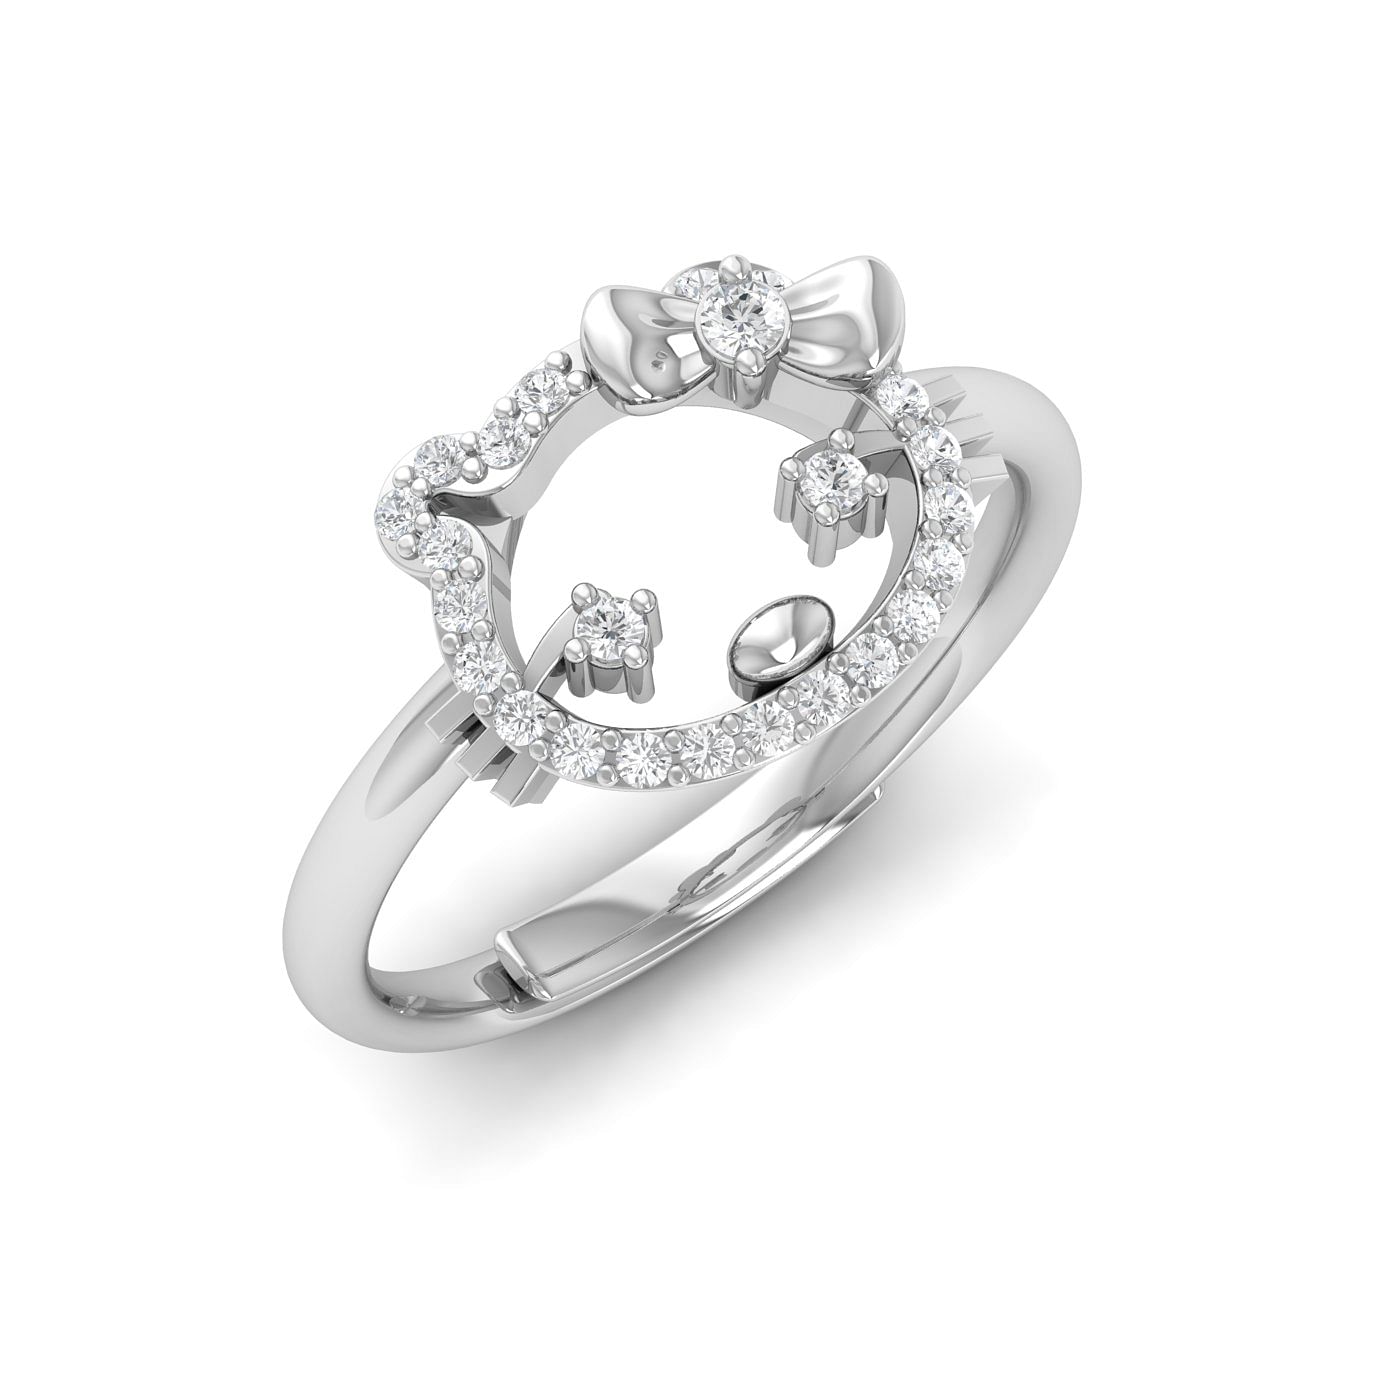 Stylish Modern Fancy Classic Diamond Ring With White Gold For Gift